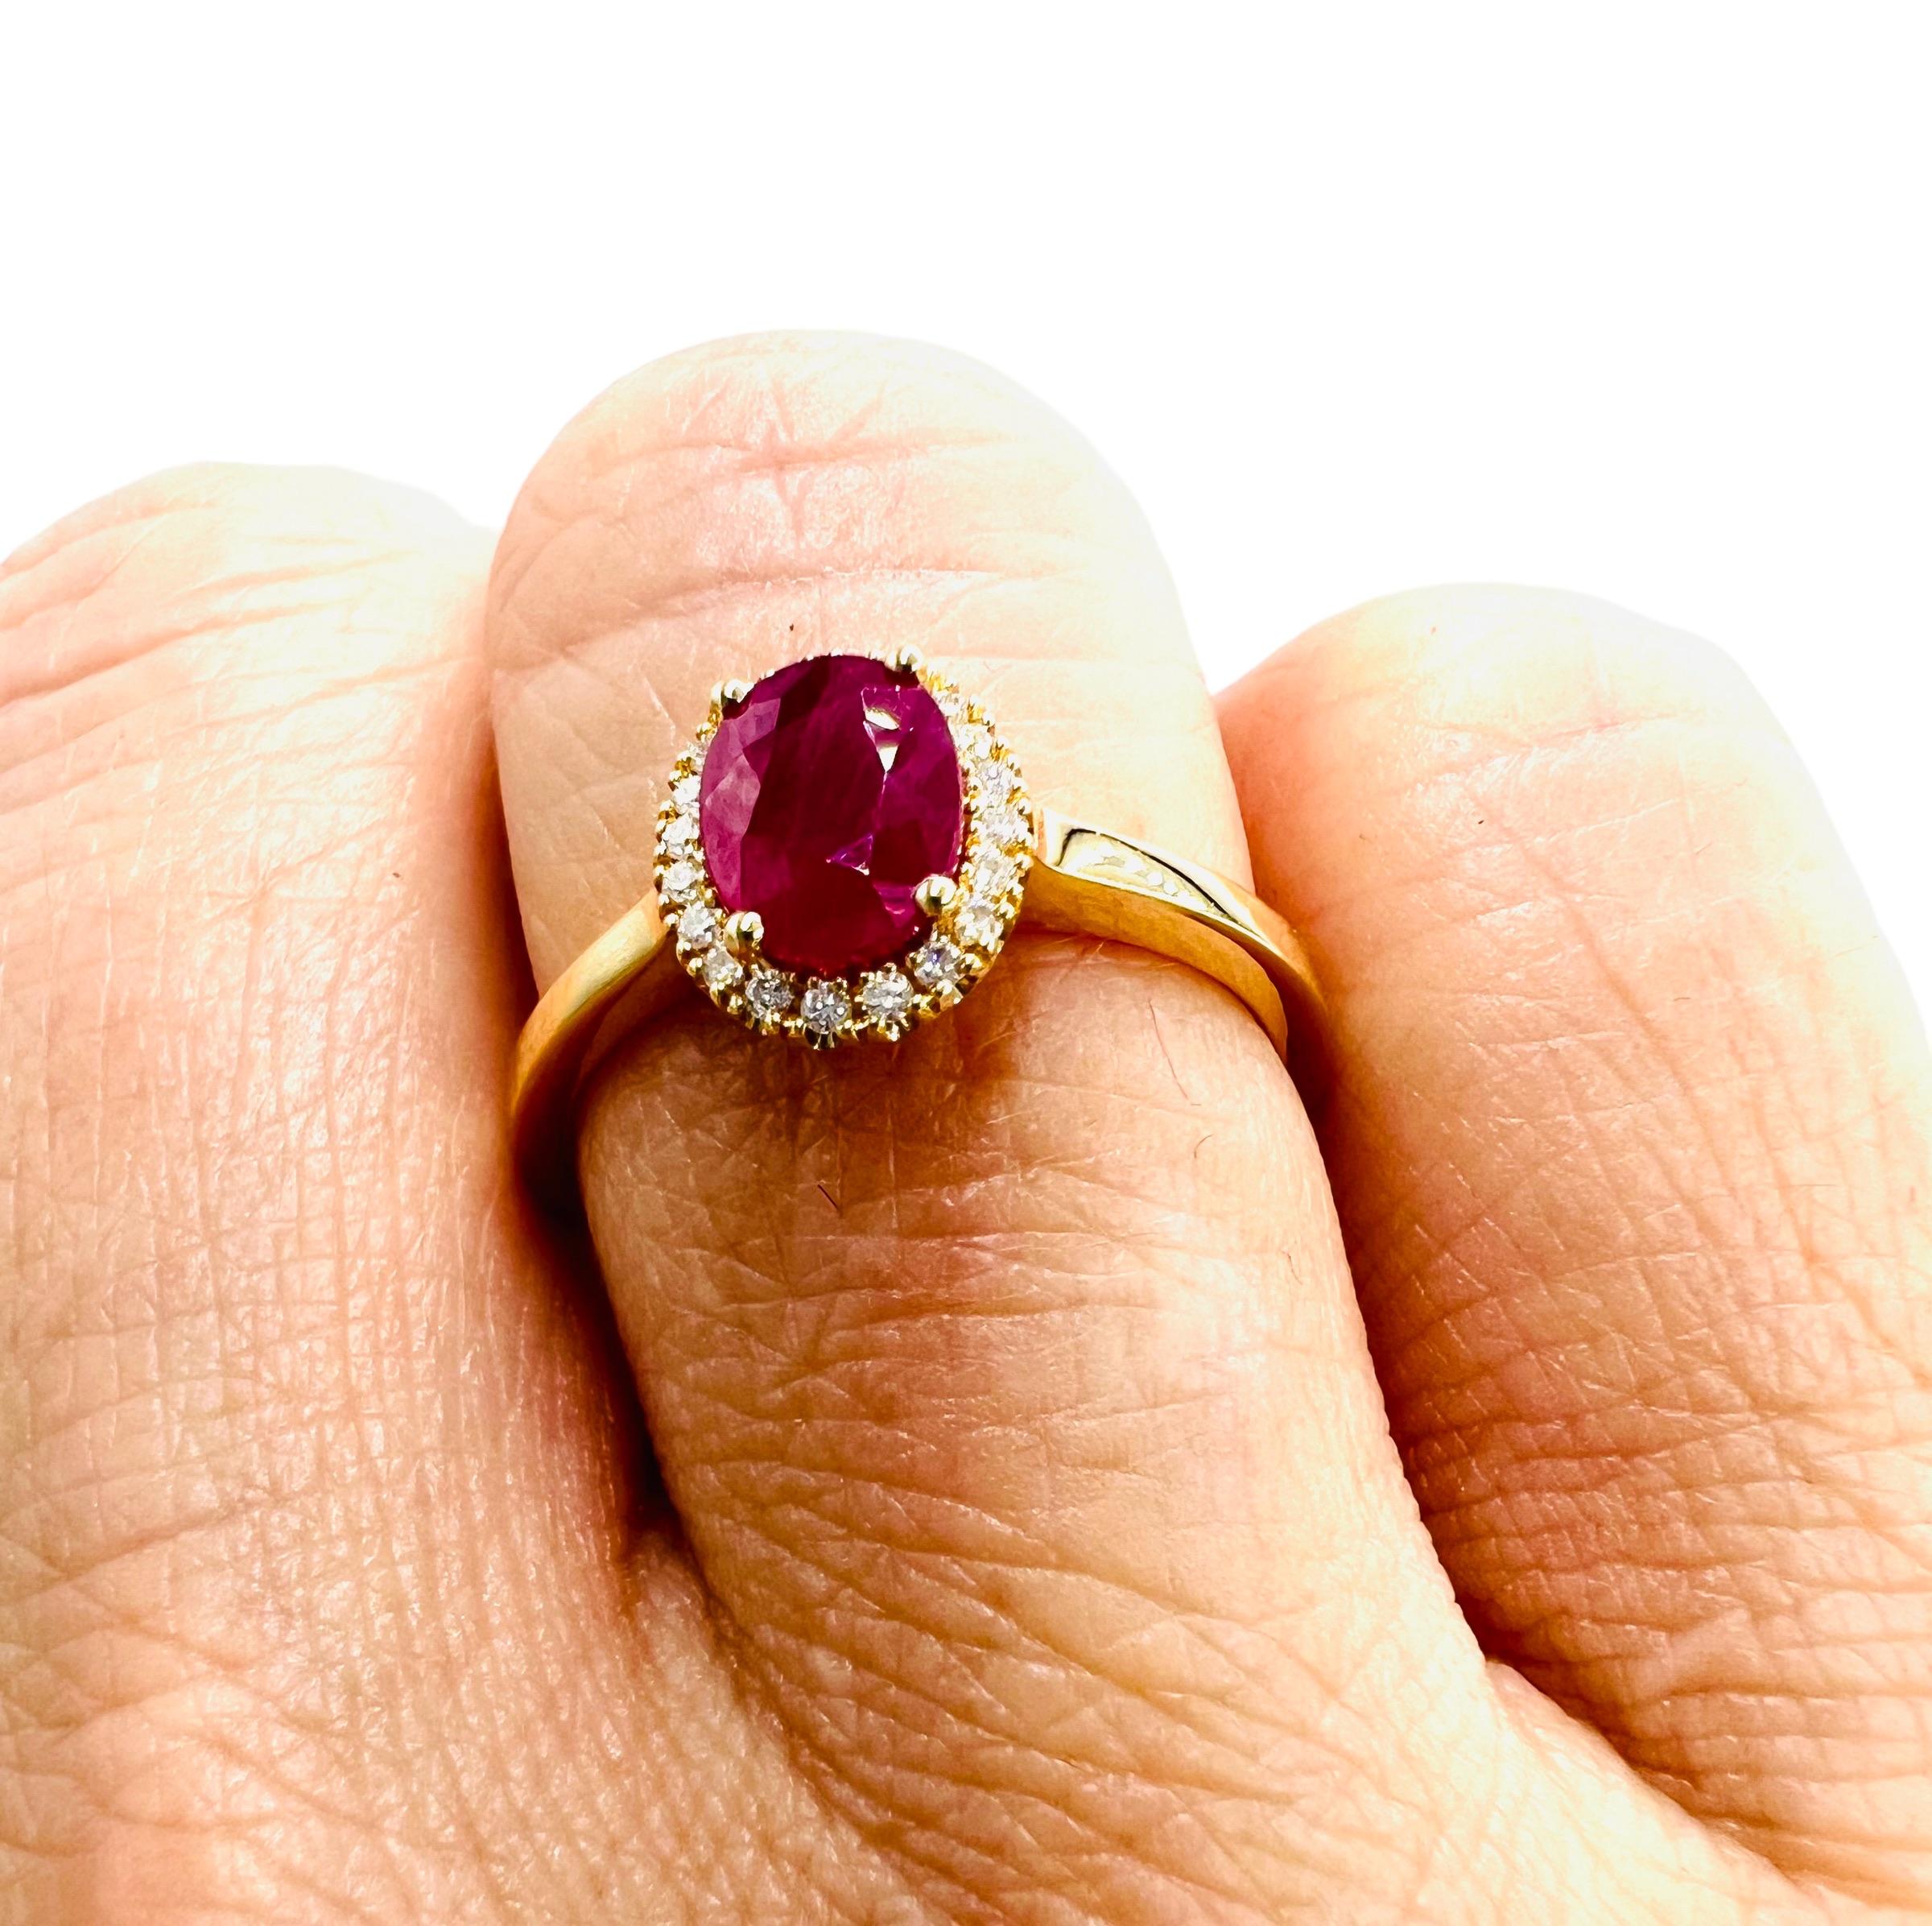 18-Carat Gold Ring, Set with a Ruby in Its Center, Paved with Brilliants 2